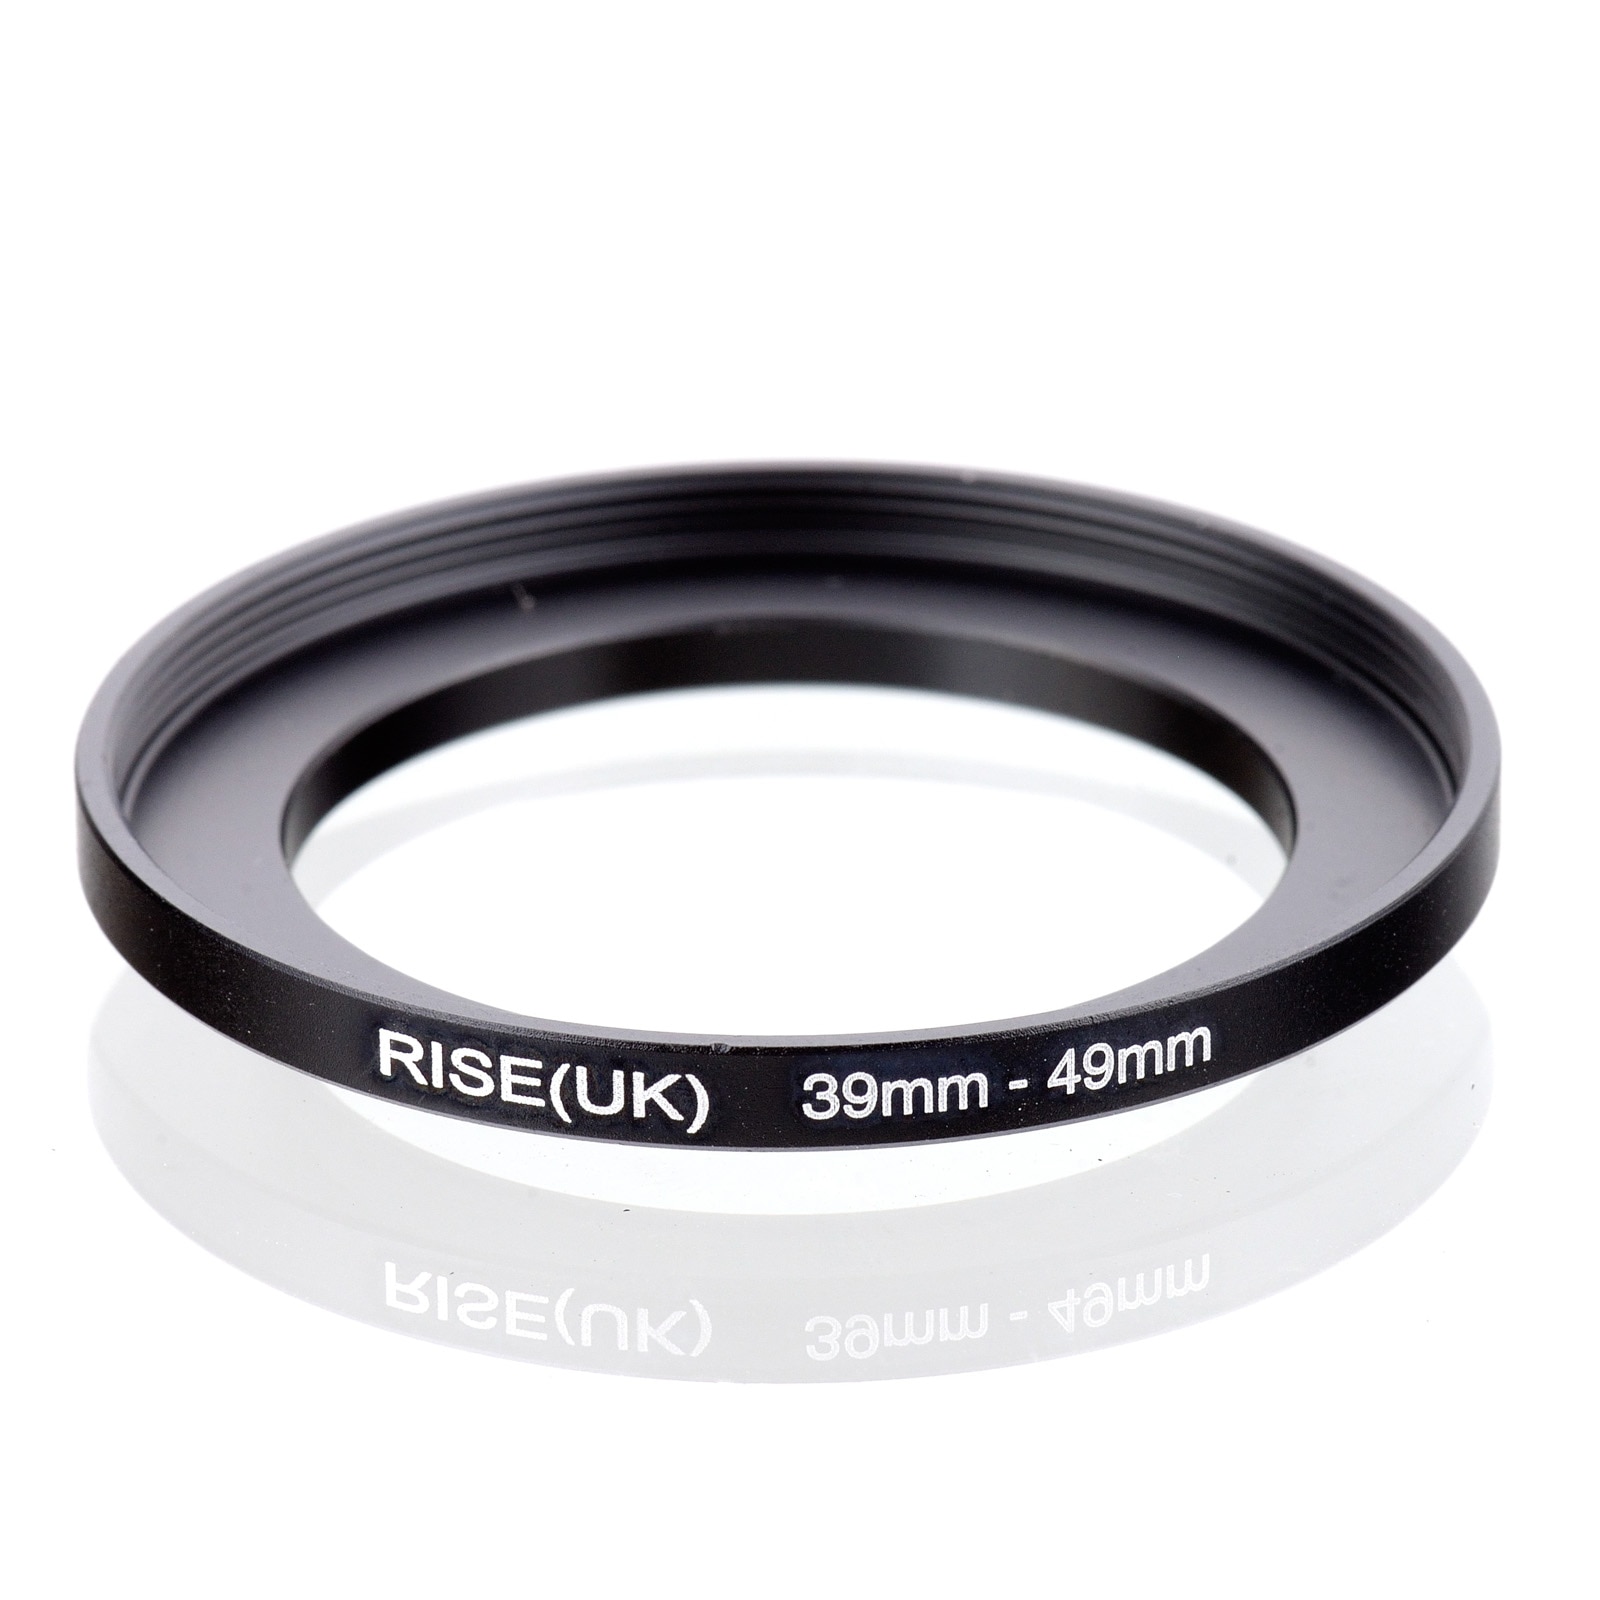 Rise (Uk) 39 Mm-49 Mm 39-49 Mm 39 Om 49 Step Up Filter Adapter Ring